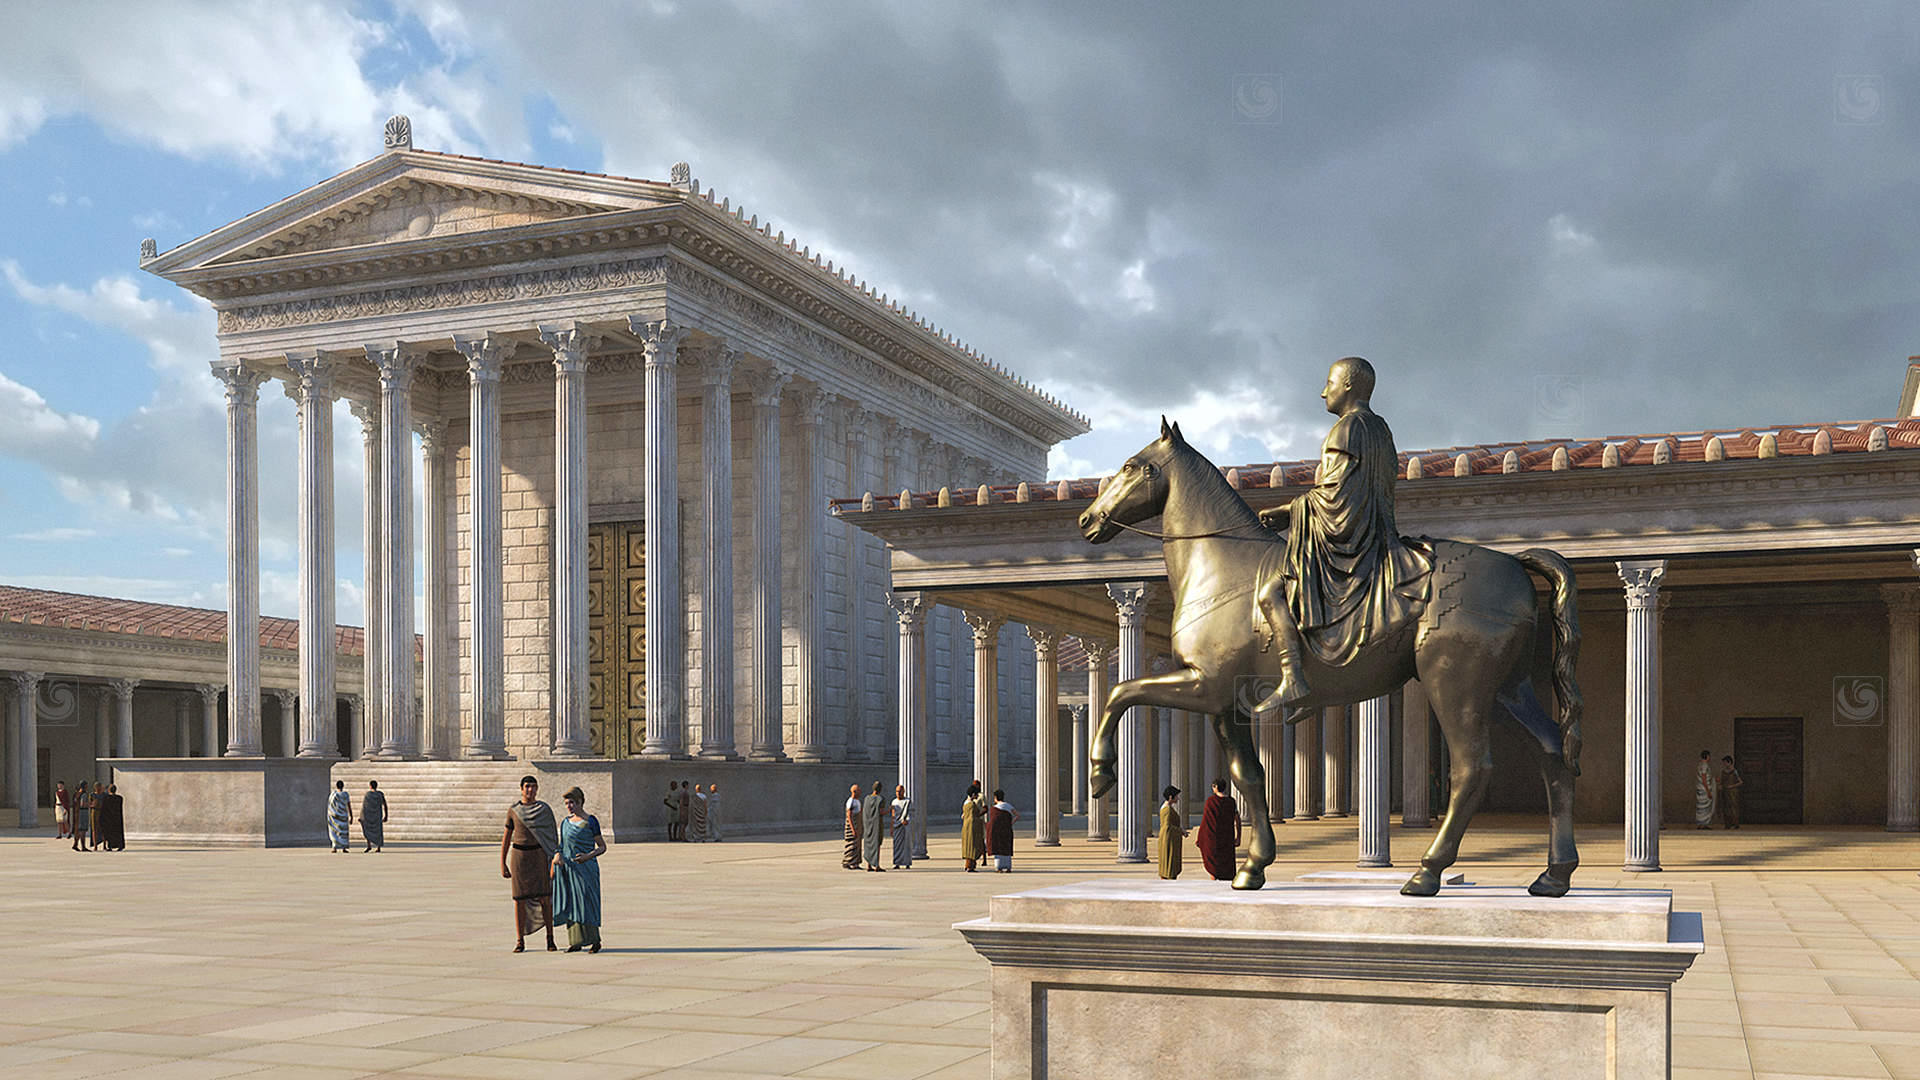 3D animation video frame showing the statue of Tiberius in the ancient Forum of Caesaraugusta